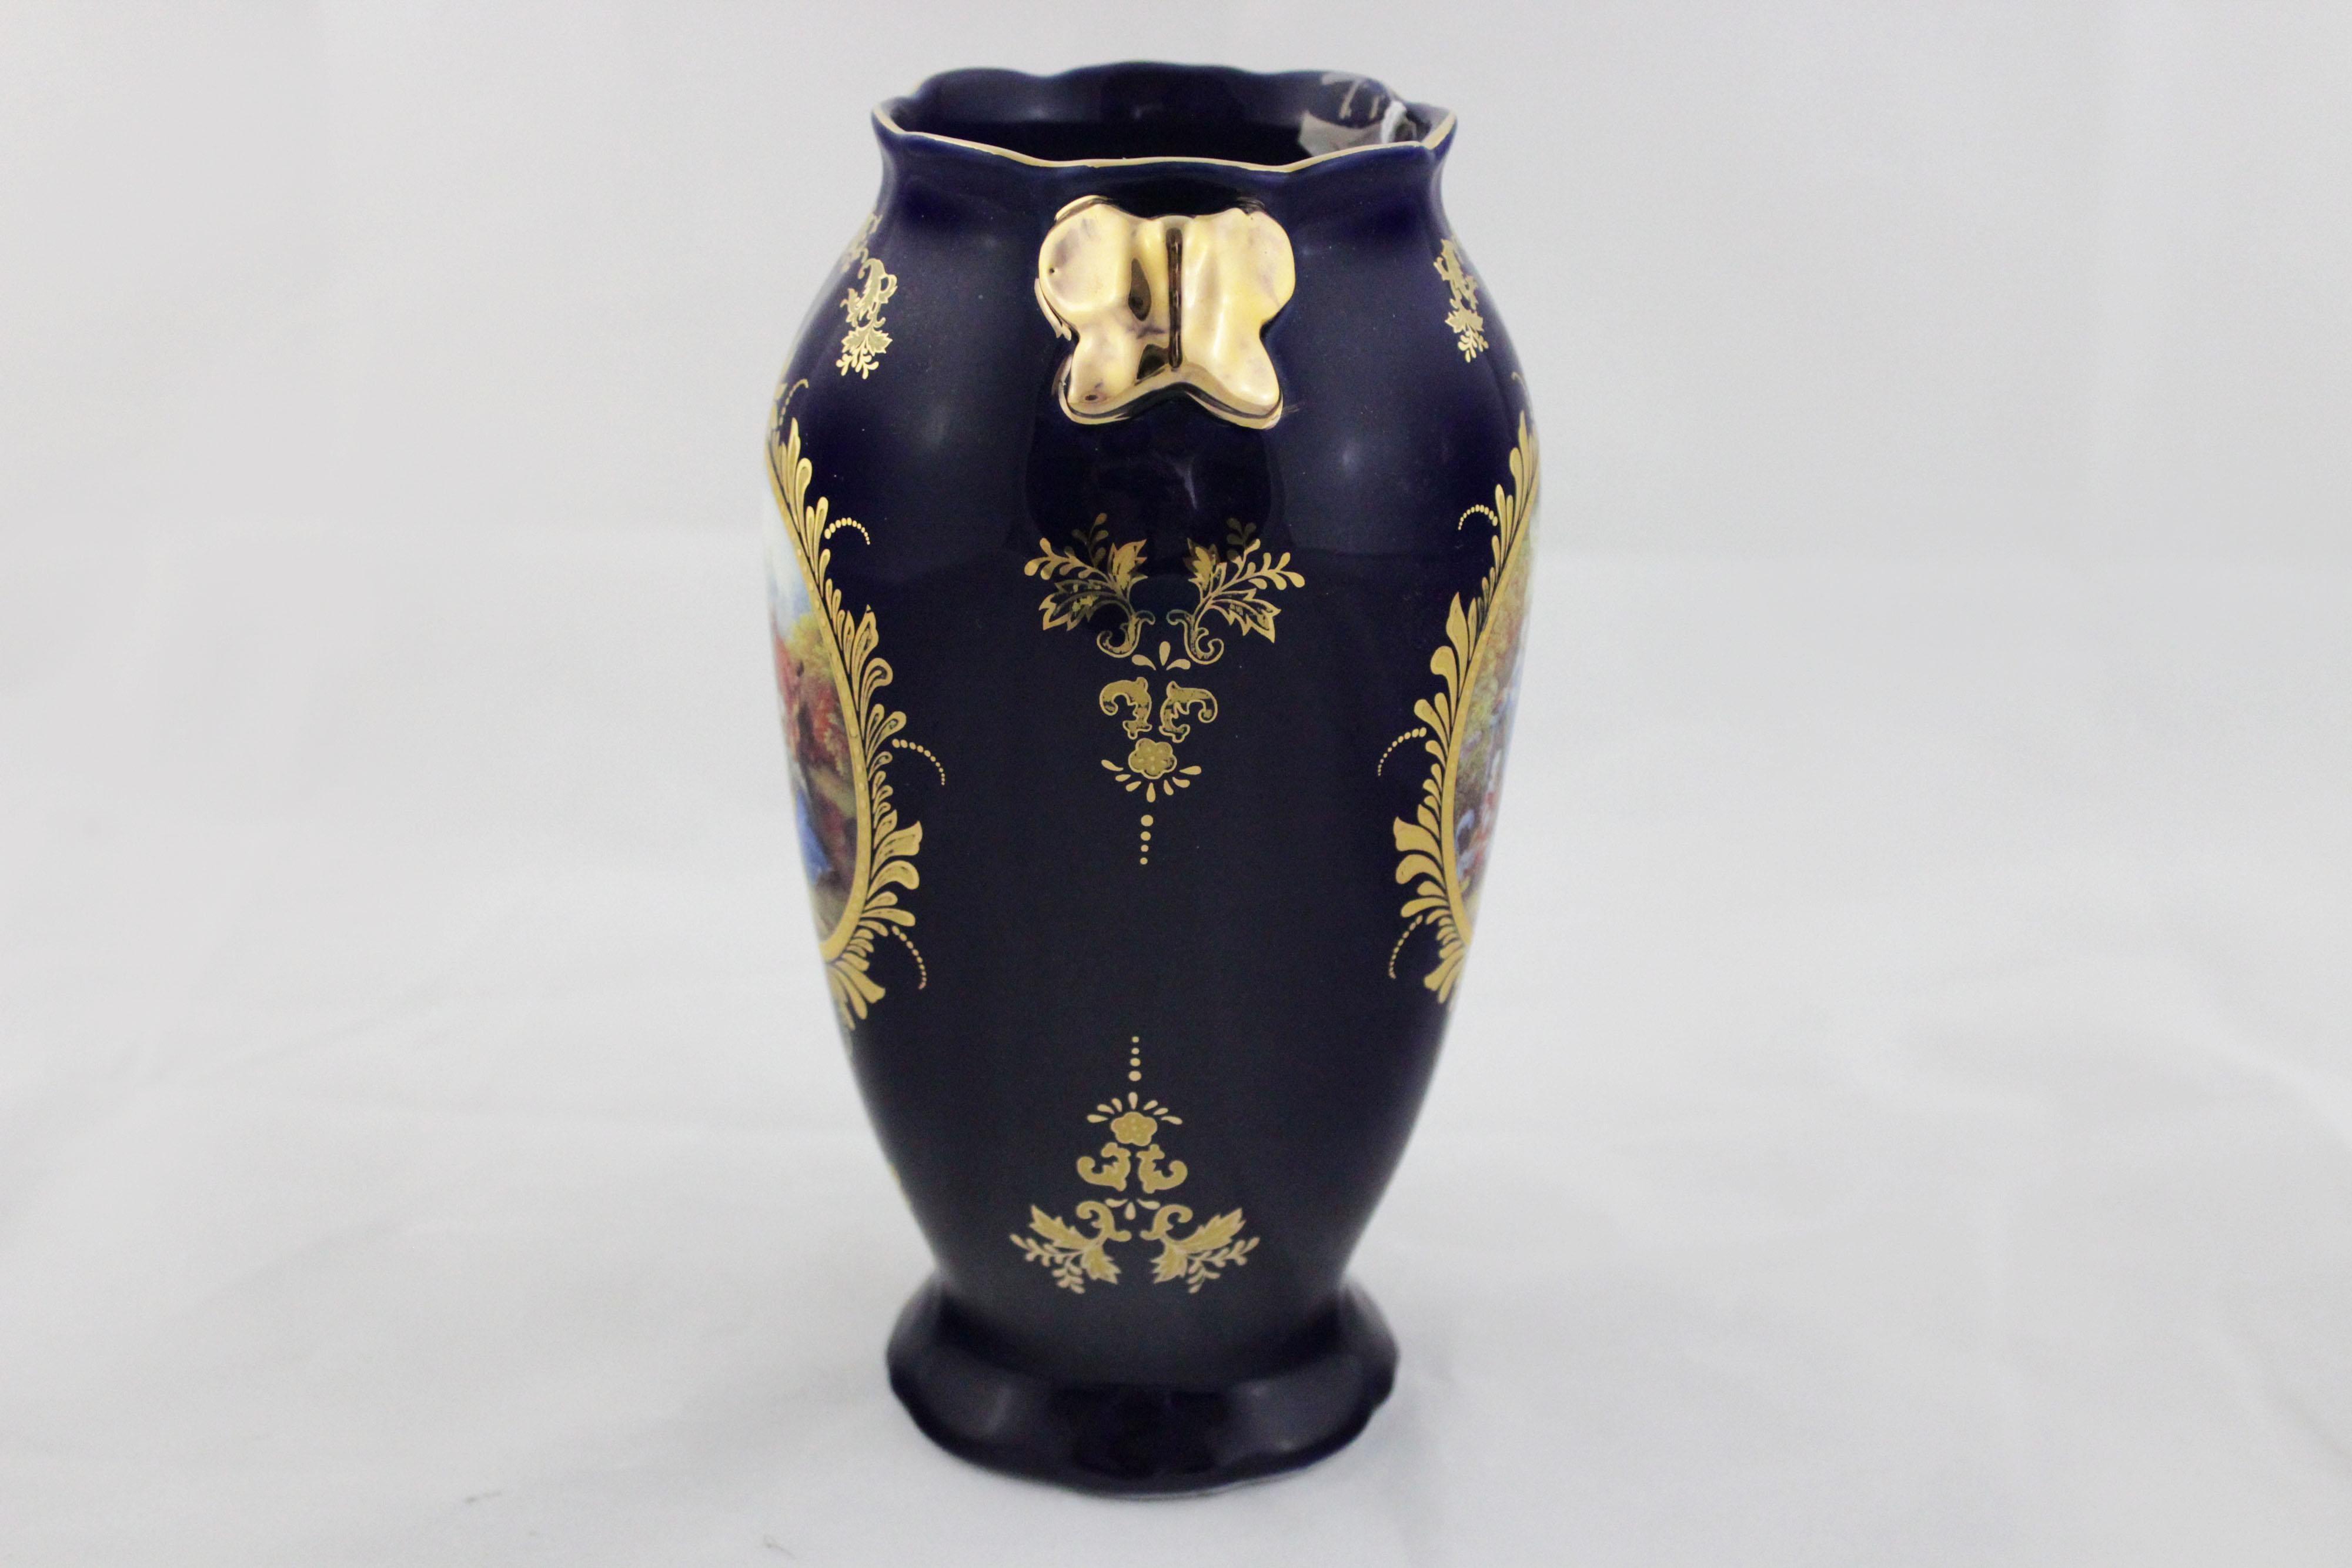 Blue ceramic vase with gilded decorations and roundels depicting court life. It dates from the time of Napoleon III, late 19th century. This vintage piece is in near original condition.
